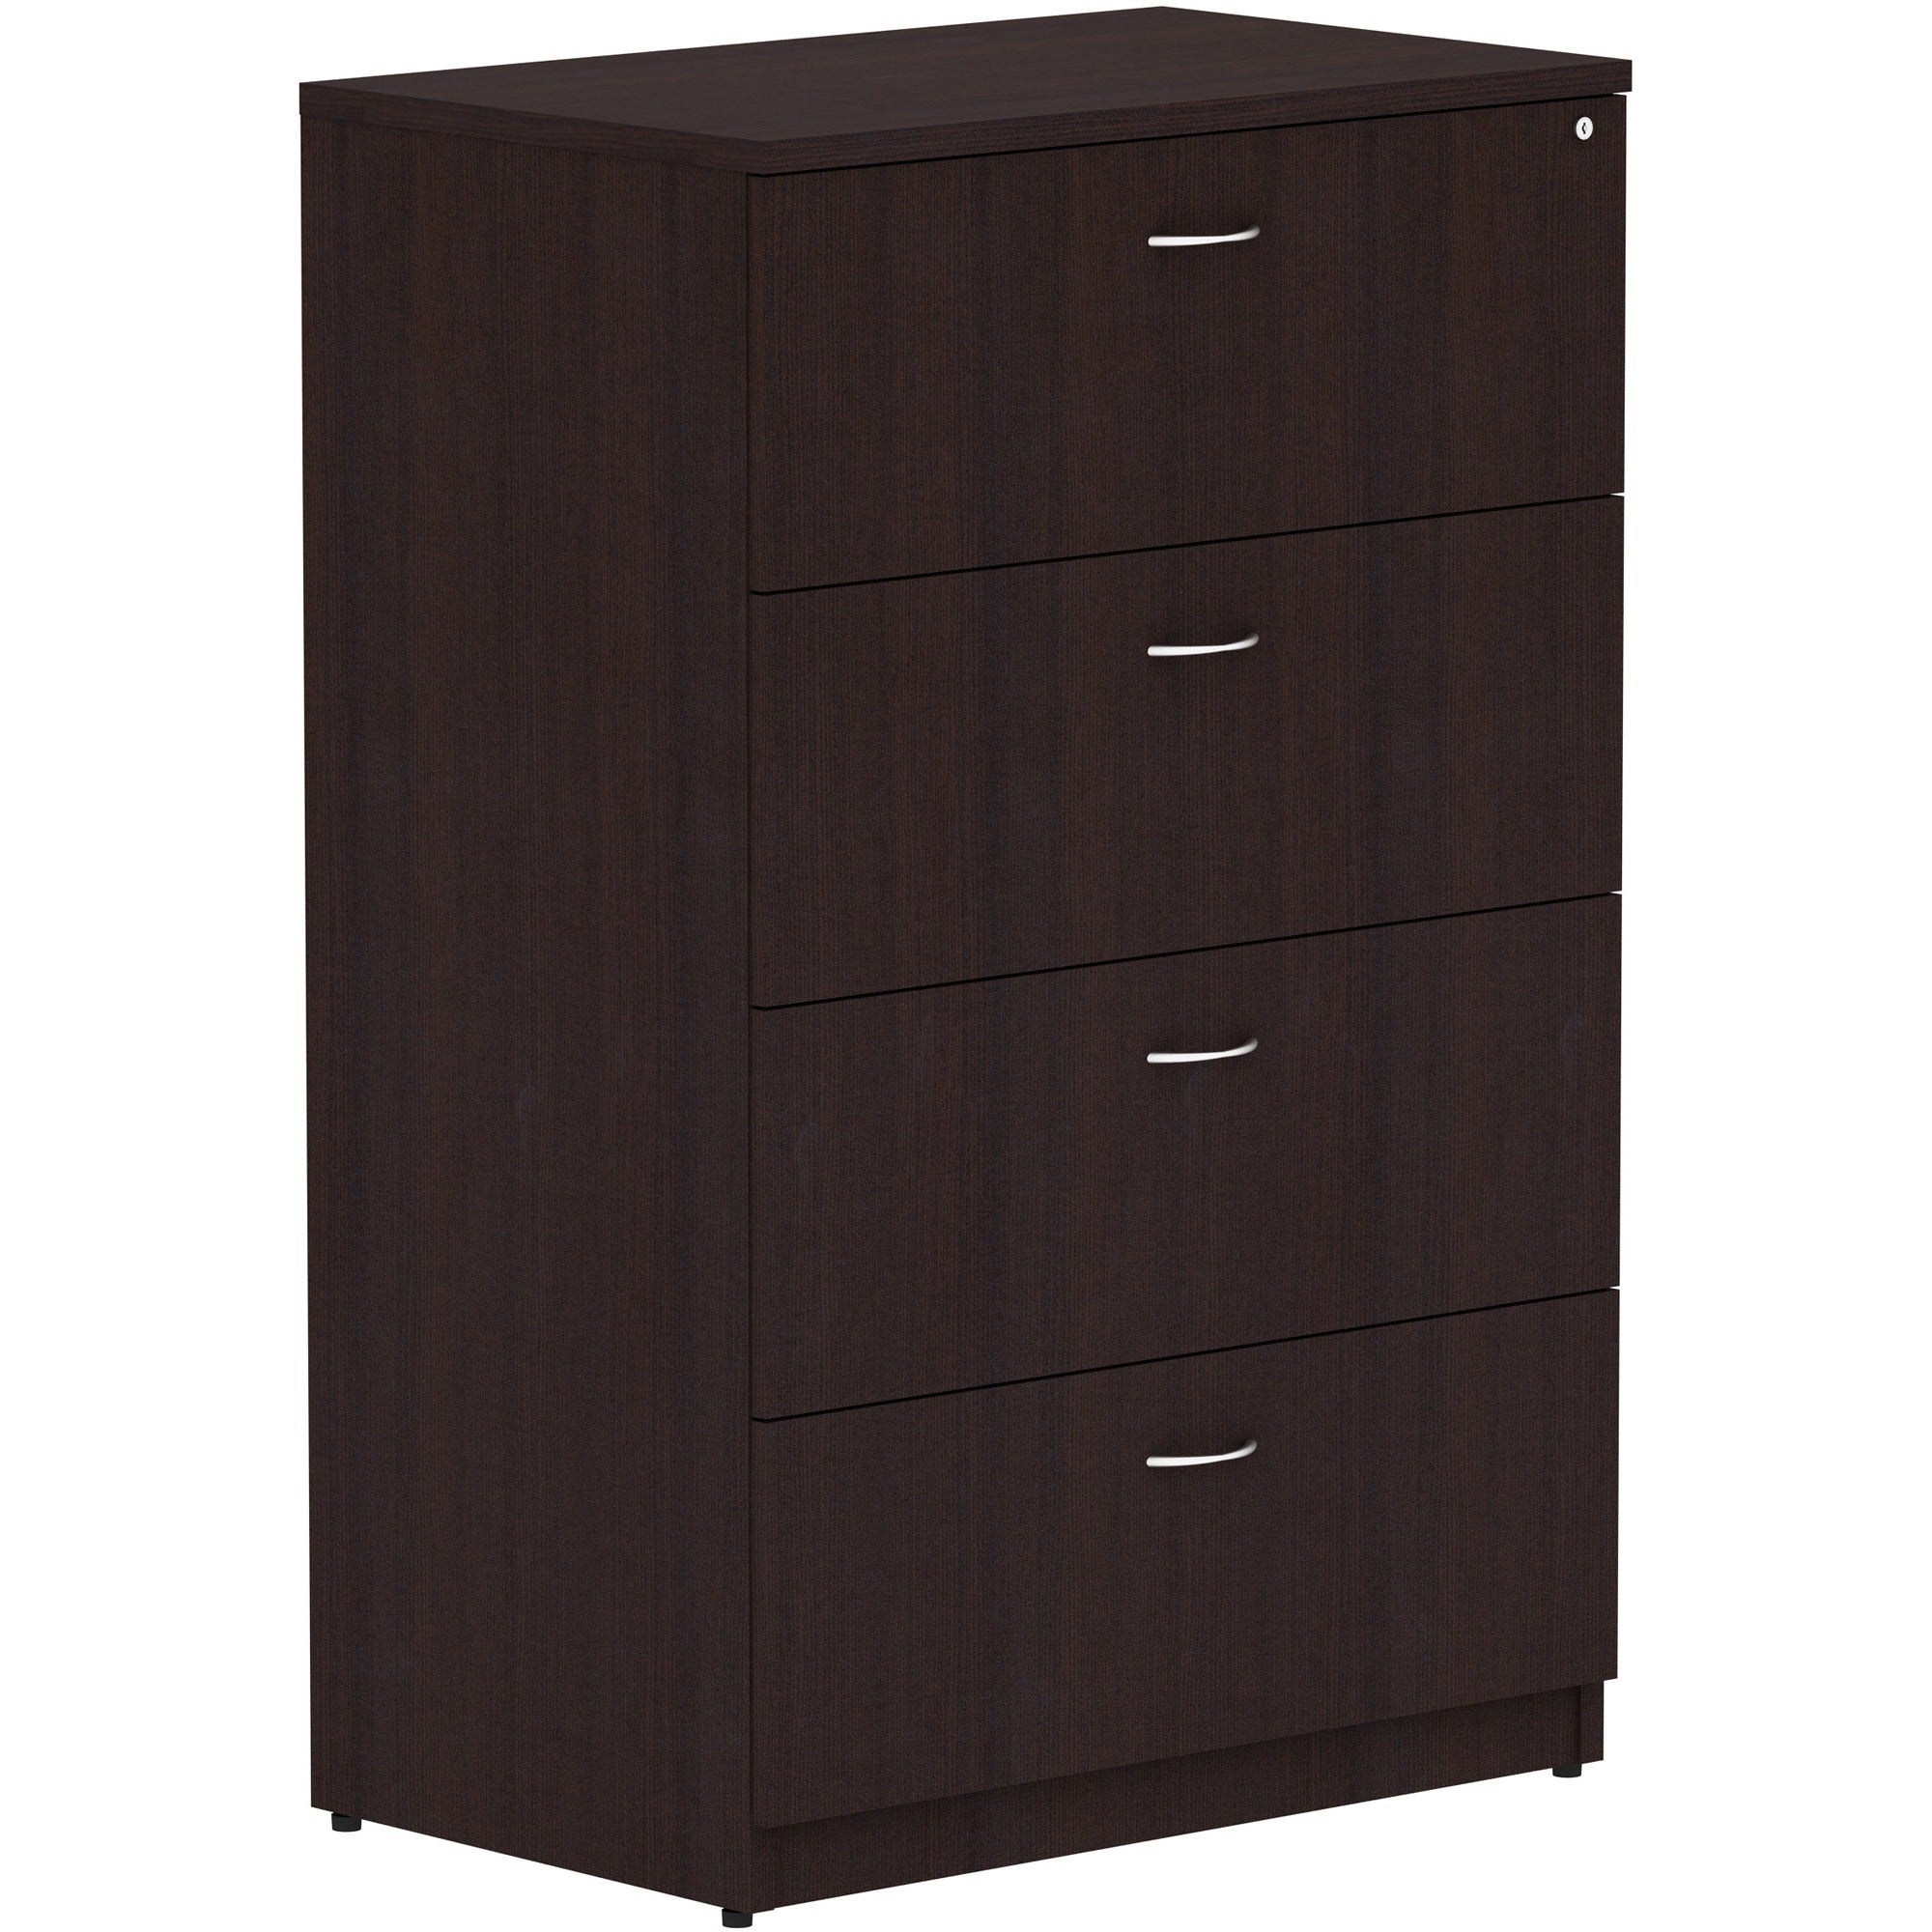 lorell-essentials-series-4-drawer-lateral-file-355-x-22548-lateral-file-1-top-4-x-file-drawers-finish-espresso-laminate_llr18274 - 1